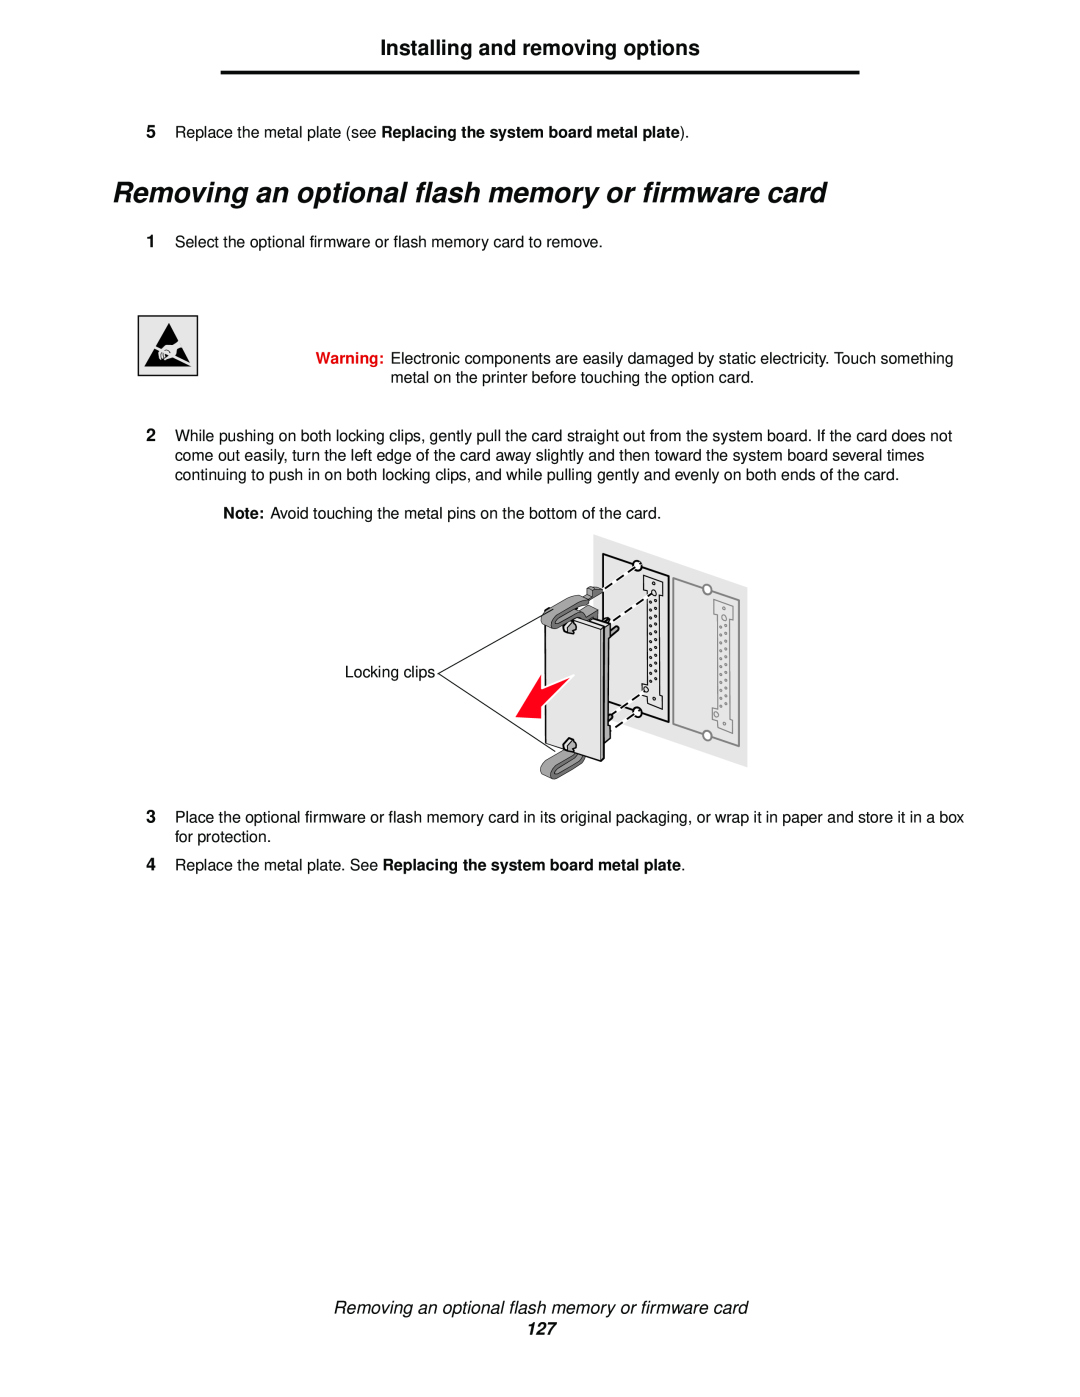 Lexmark C520, C524, C522 manual Removing an optional flash memory or firmware card, Installing and removing options 